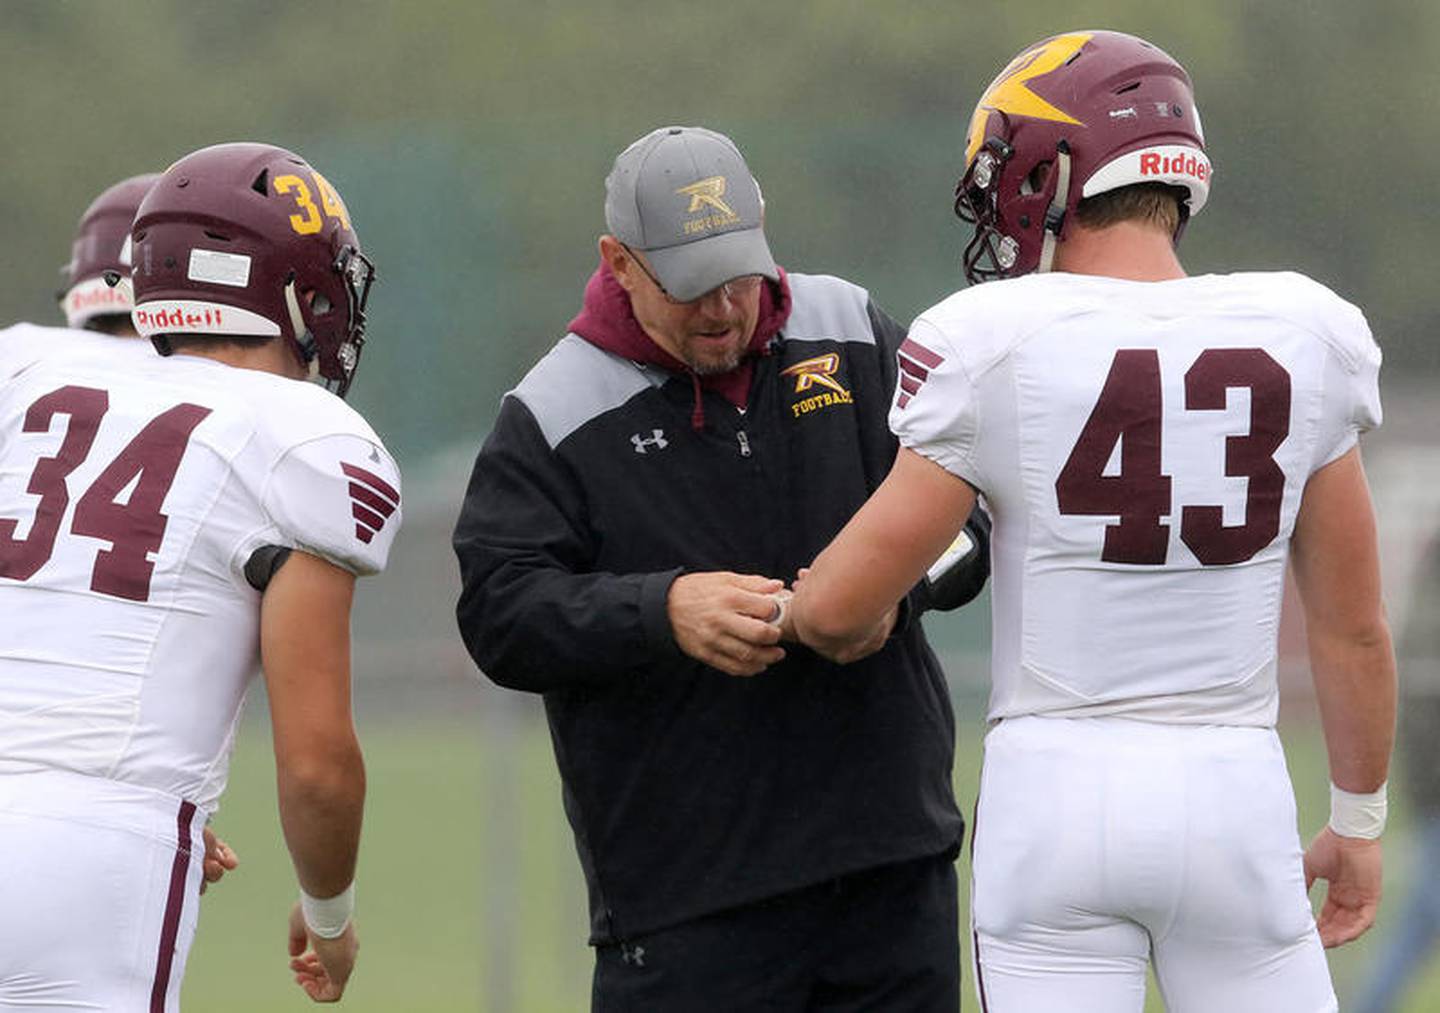 Marengo defensive coordinator Steve Wood, center, tapes Dalton Wood's wrist as Brock Wood, left, heads back for another play while the Indians warm up before facing Richmond-Burton during their week 5 football game at Marengo Community High School on Saturday, Sep. 28, 2019 in Marengo.  The game was originally scheduled for Friday, but rain postponed the game to Saturday.  Richmond-Burton won 38-13.  Steve Wood is Brock's and Dalton's father.